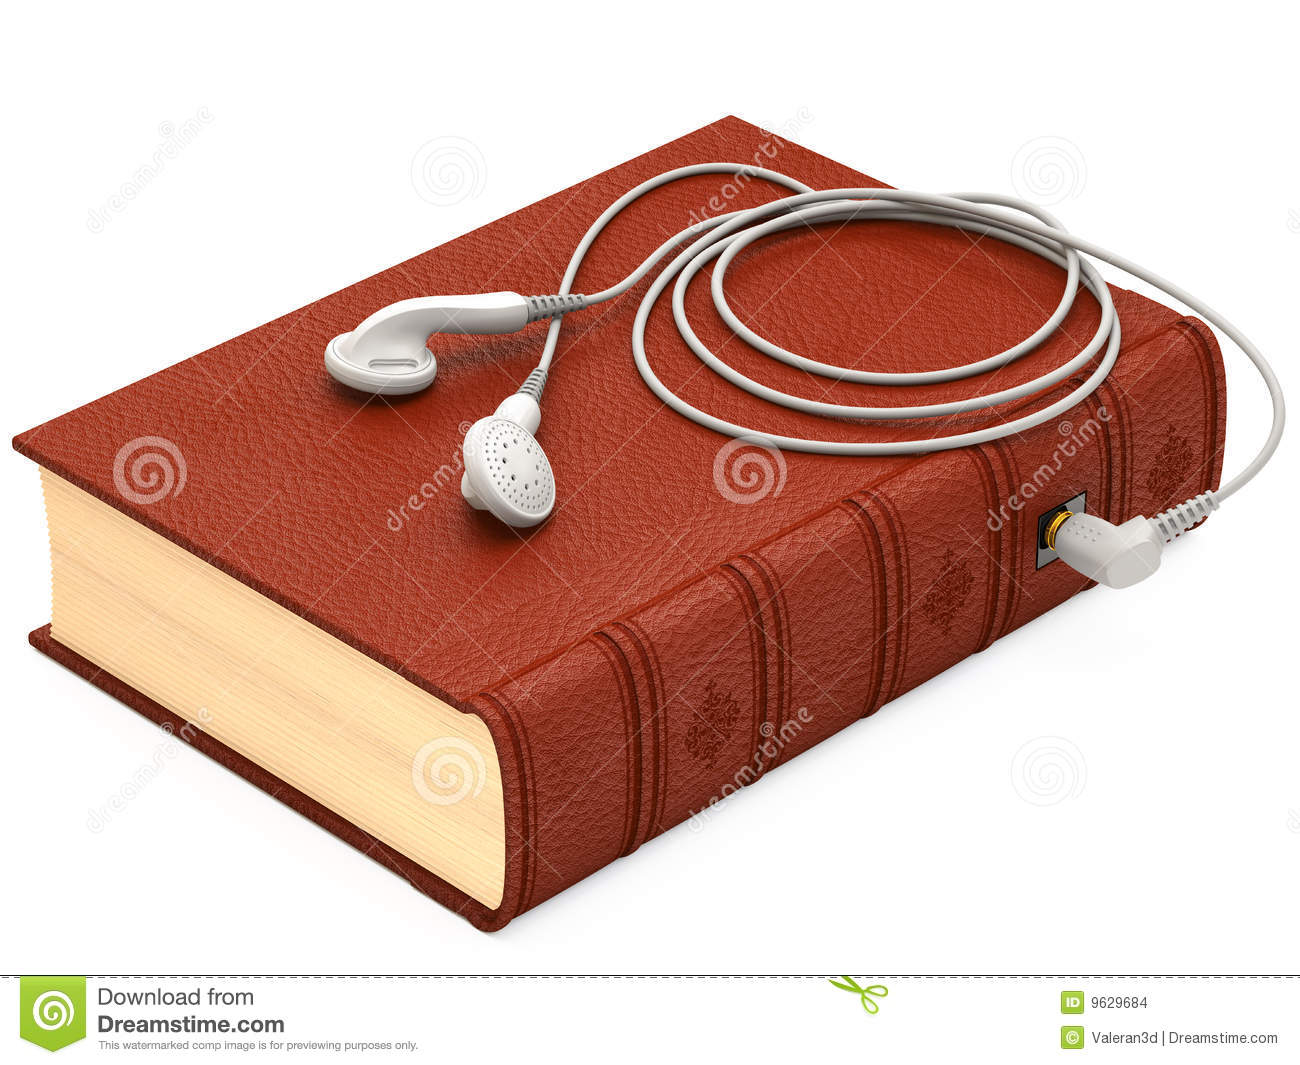 3d Render Of Concept Audiobook On White Background 